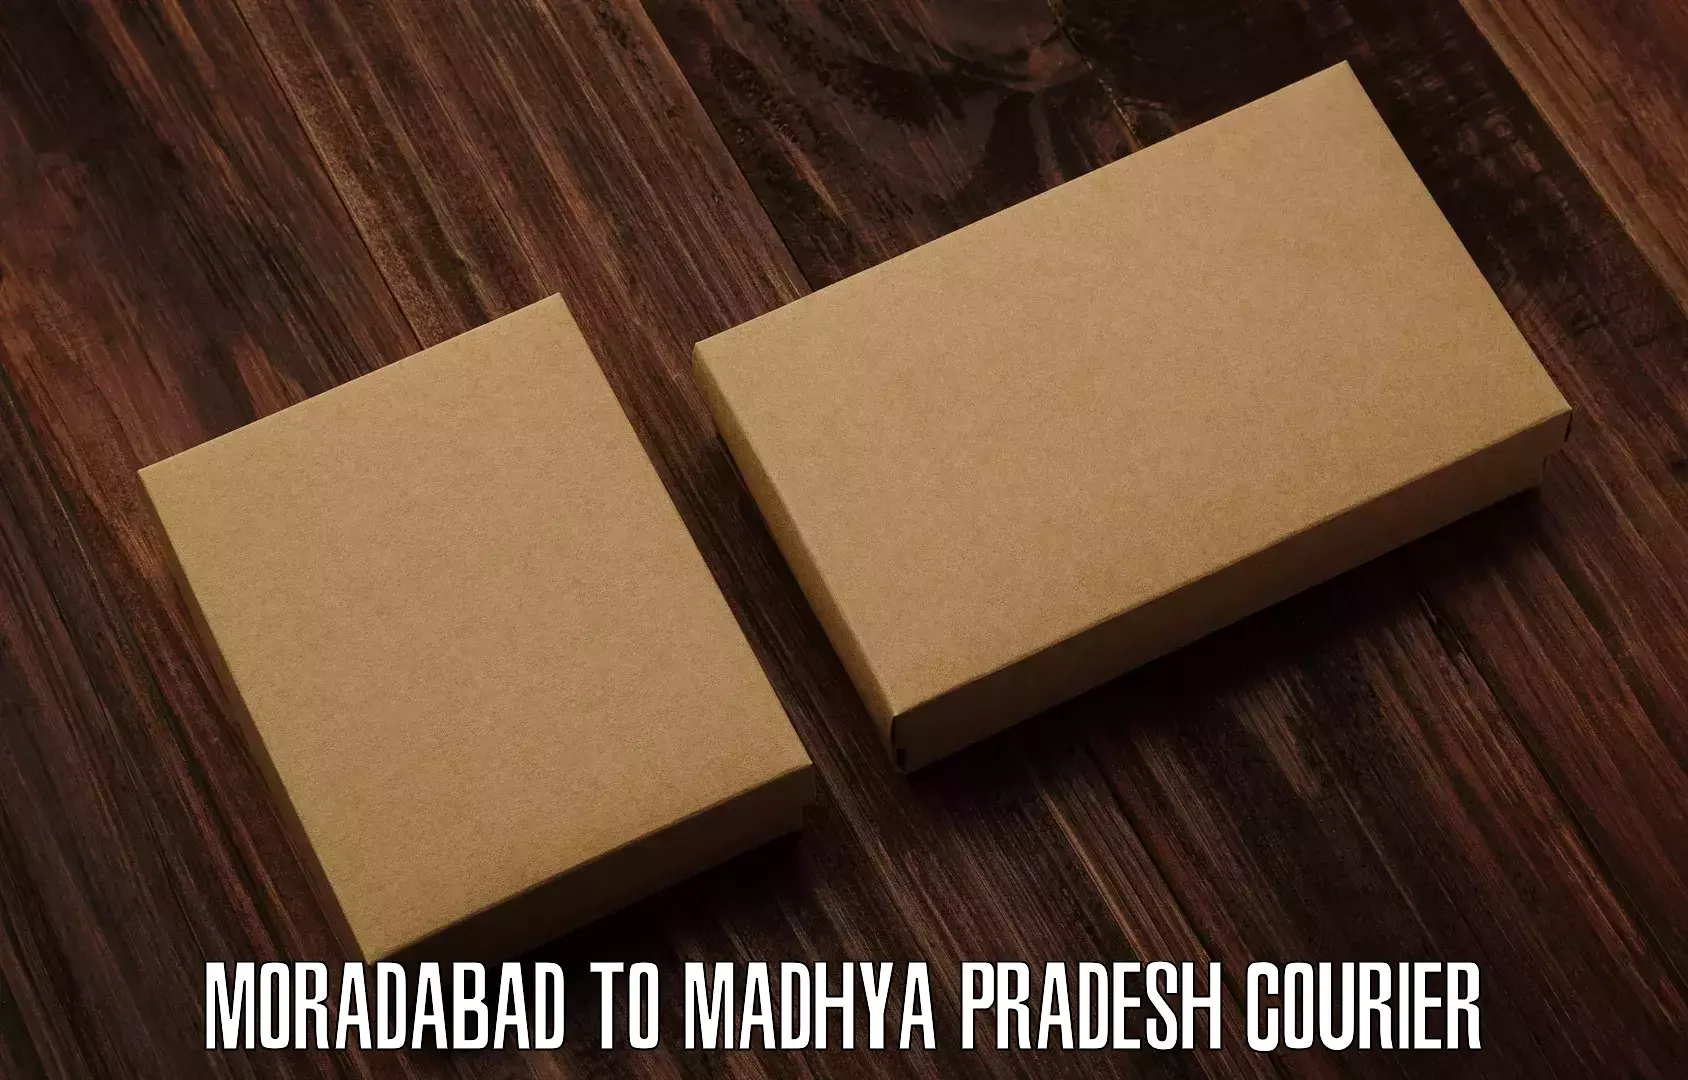 Automated parcel services Moradabad to Deosar